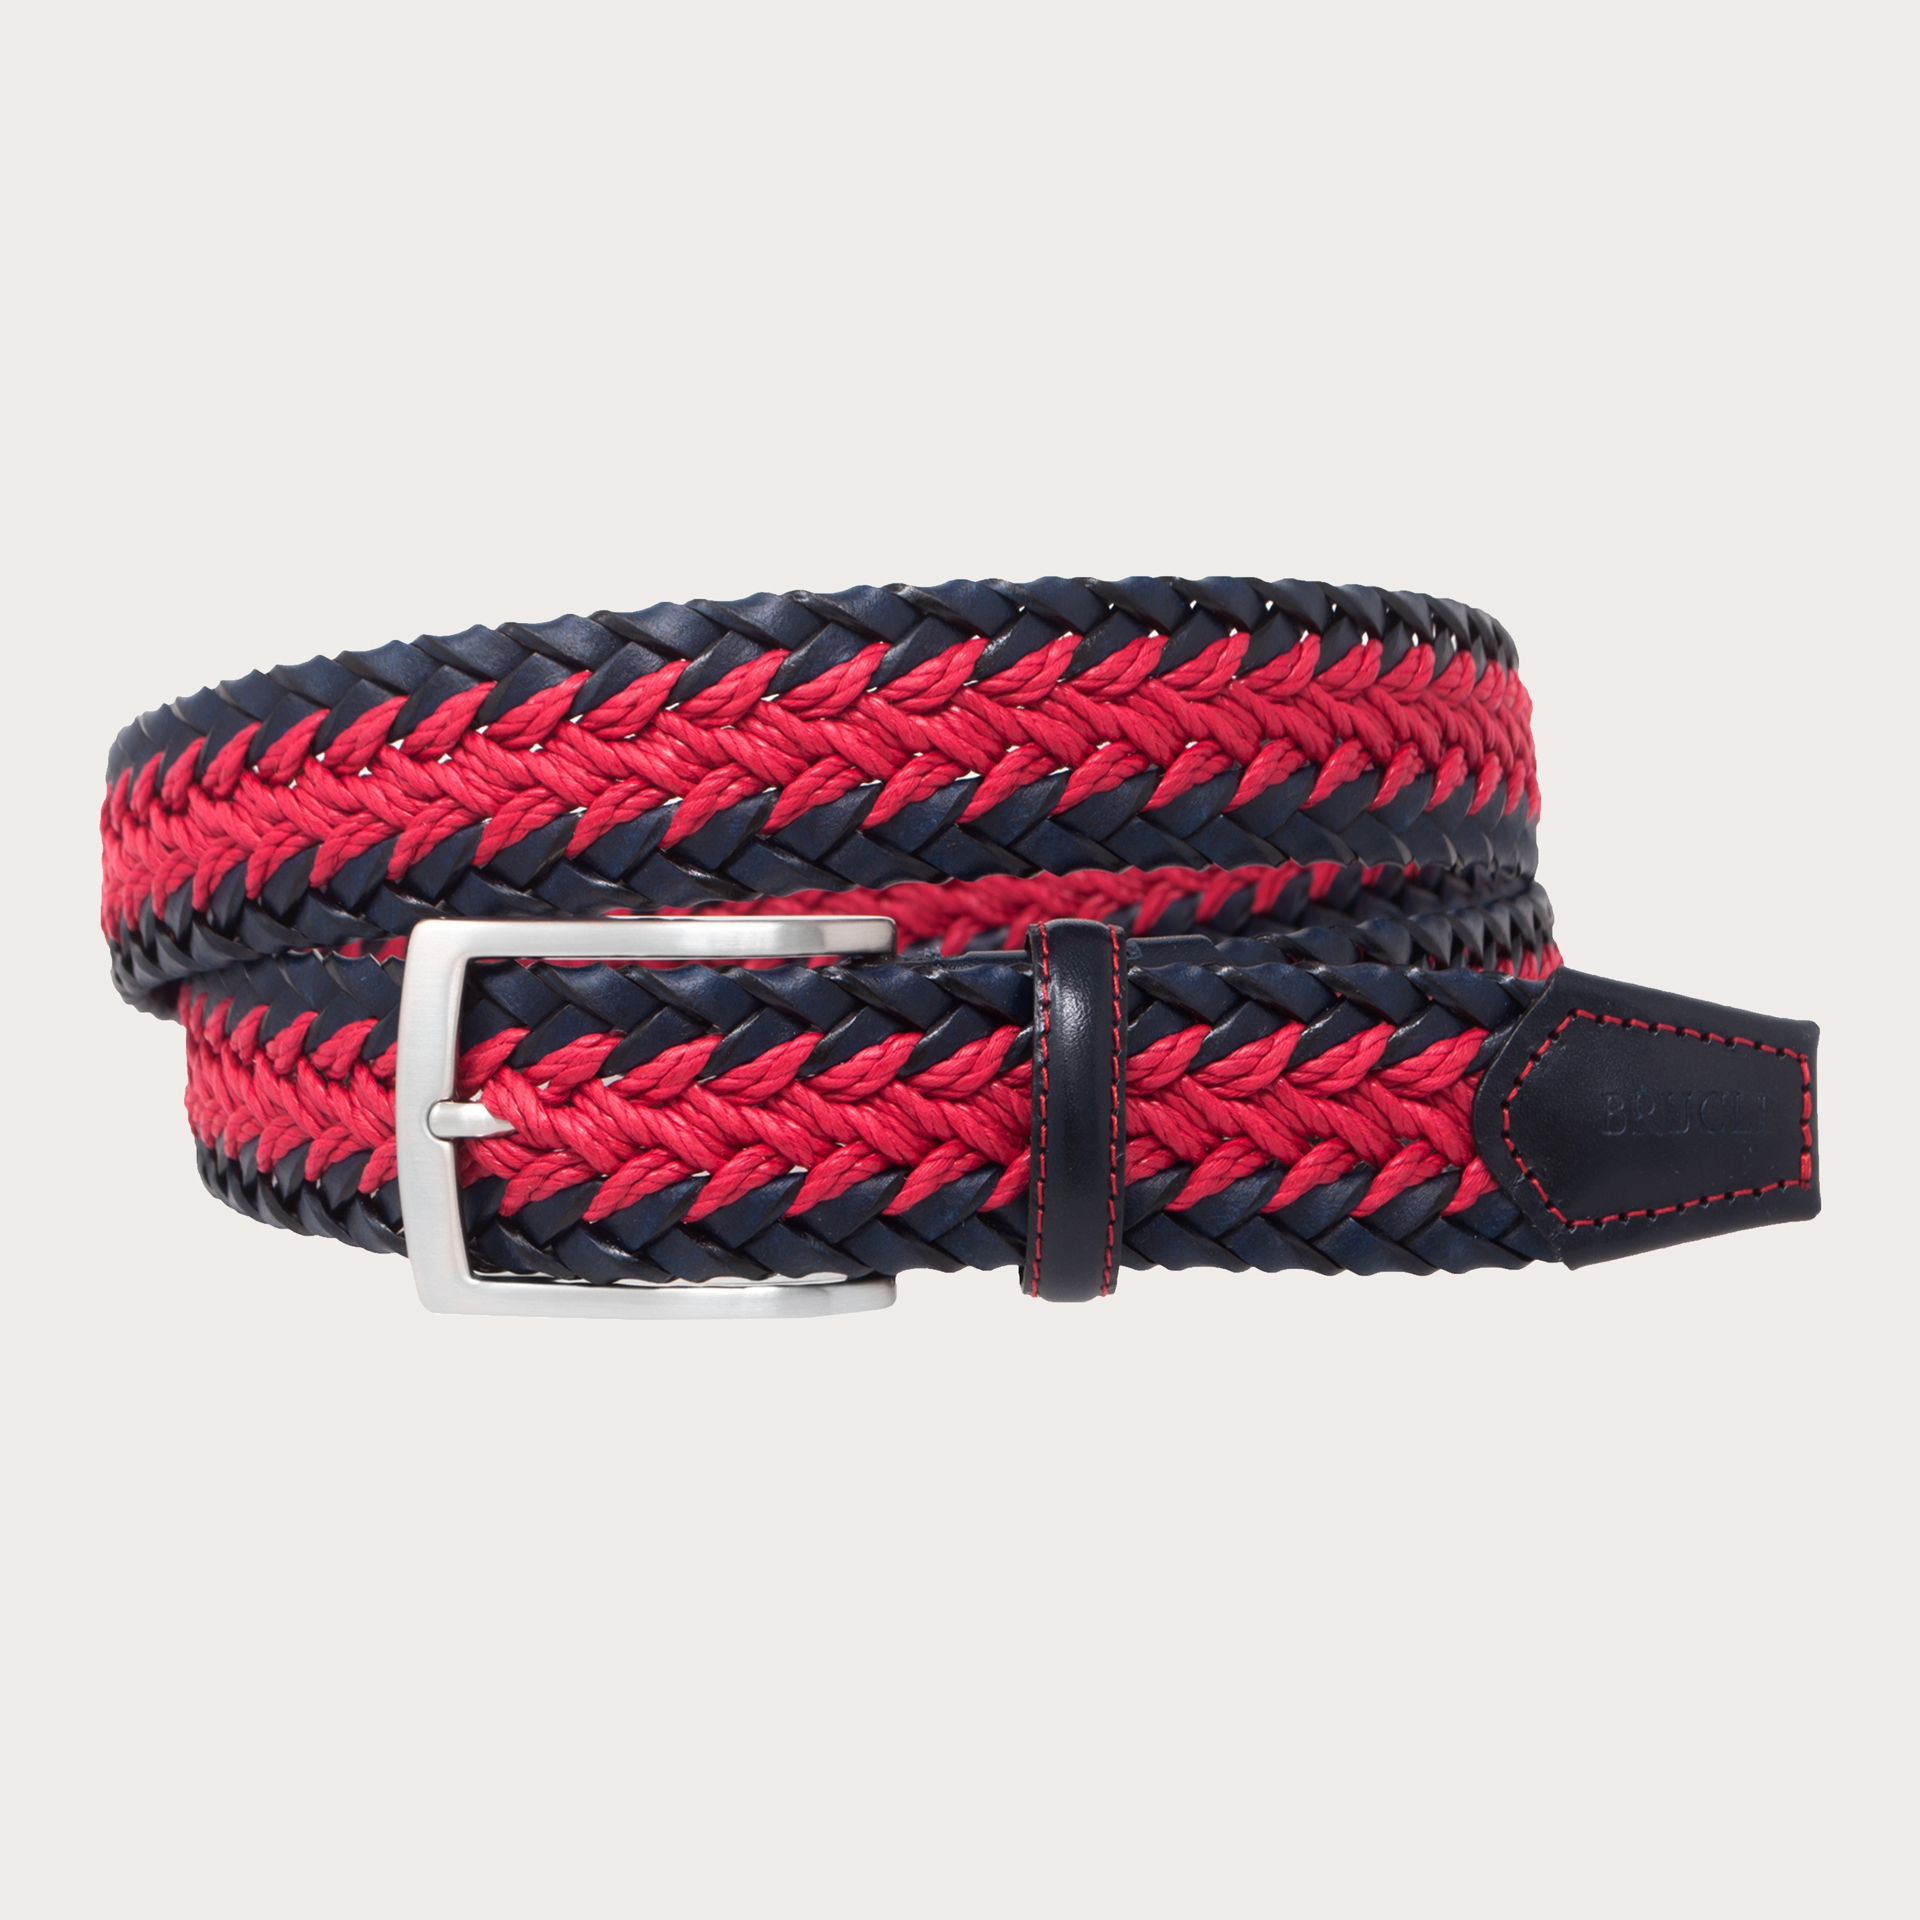 Braided cotton and leather belt, dark blue and red